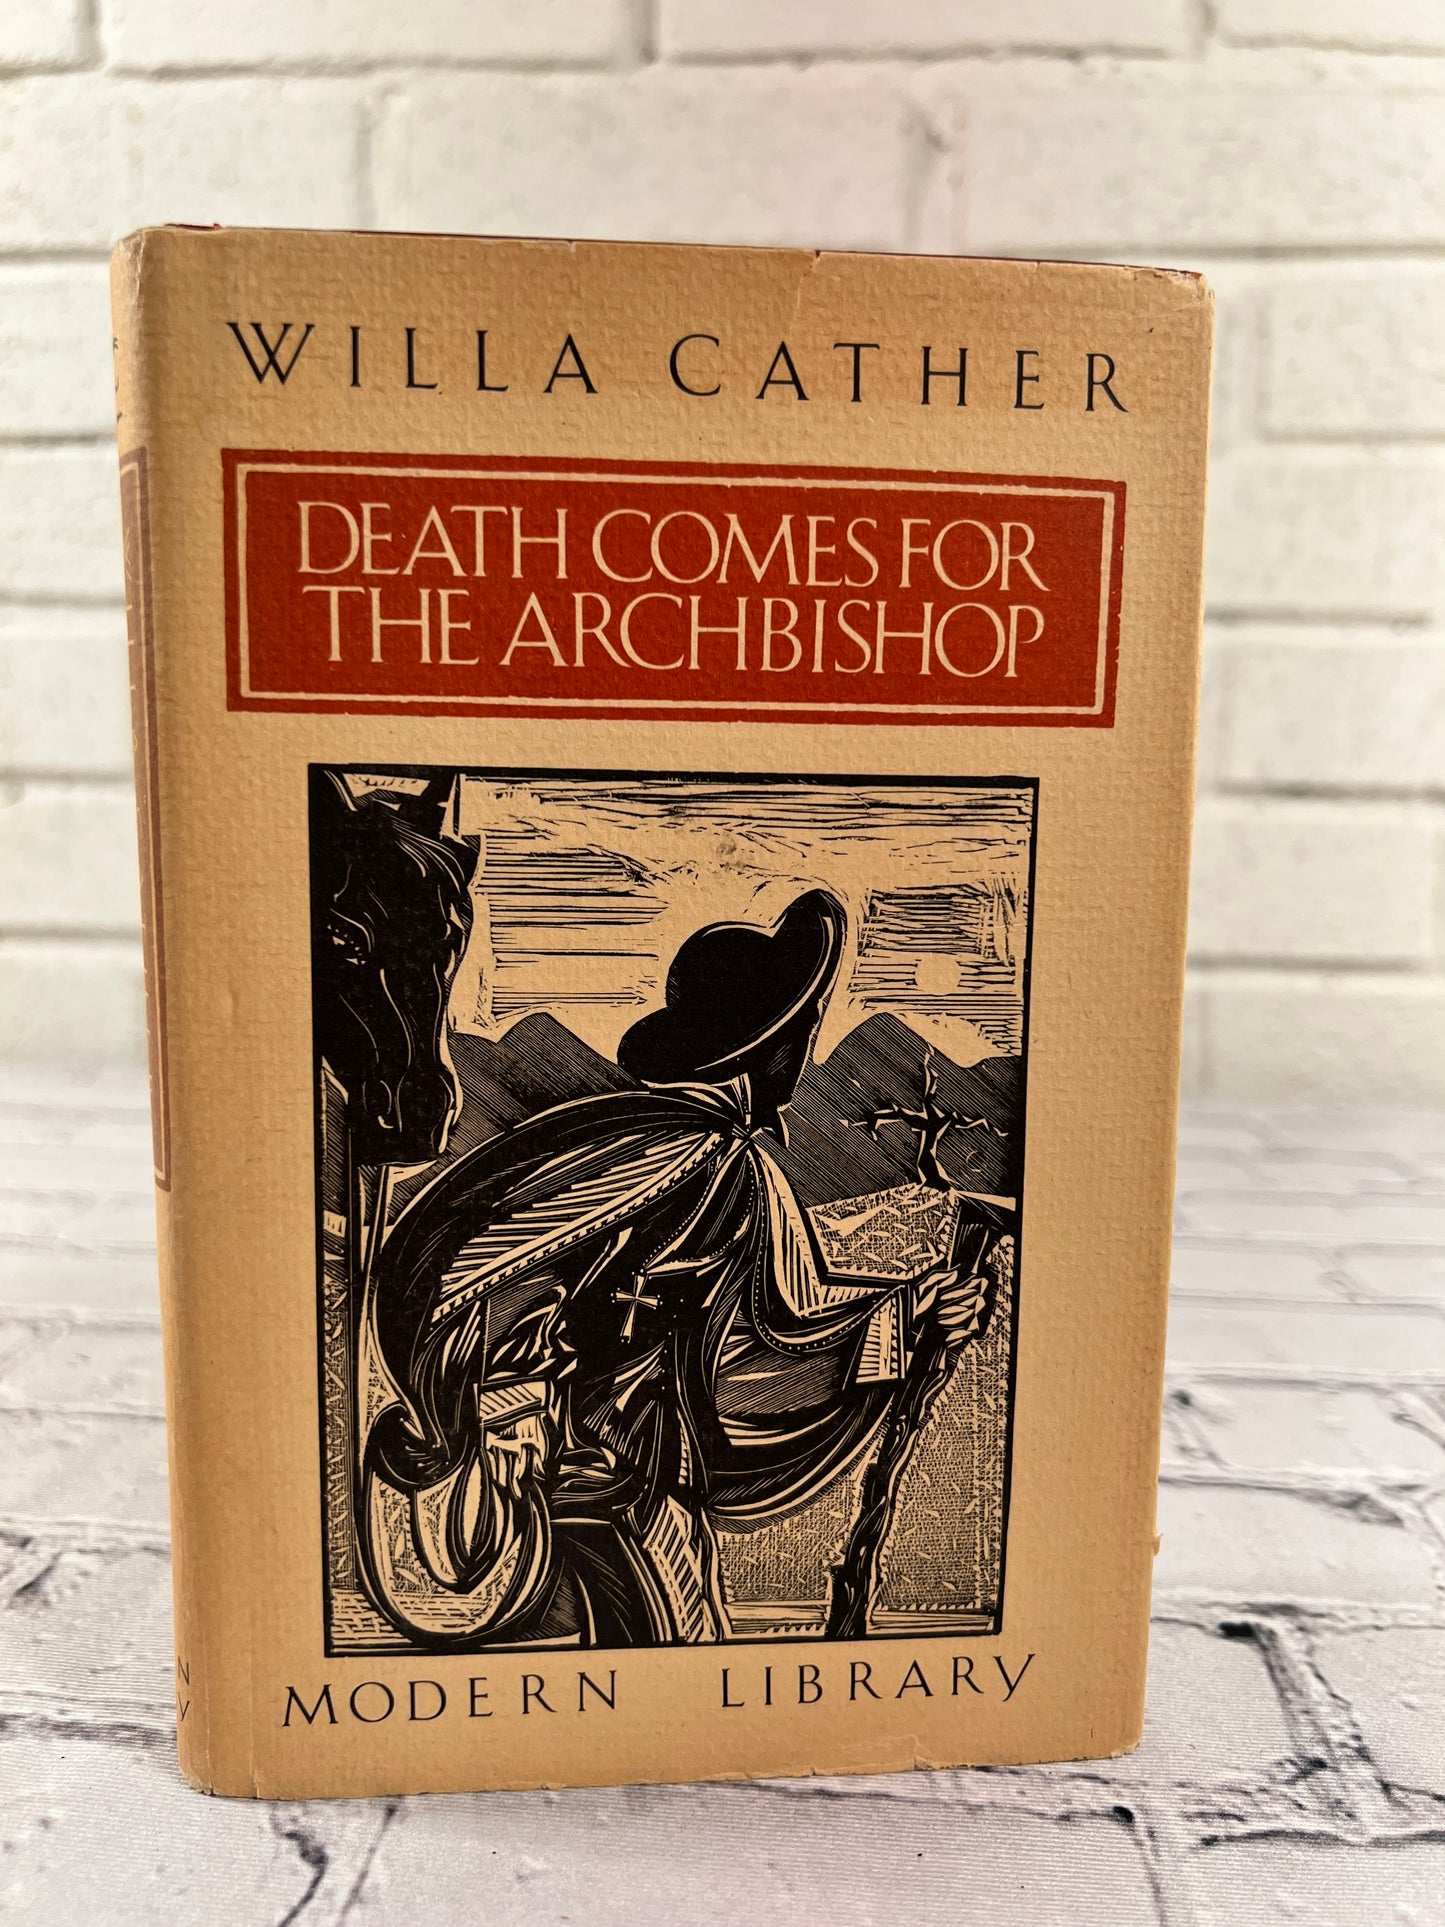 Death Comes for Archbishop by Willa Cather [1984 · Modern Library]